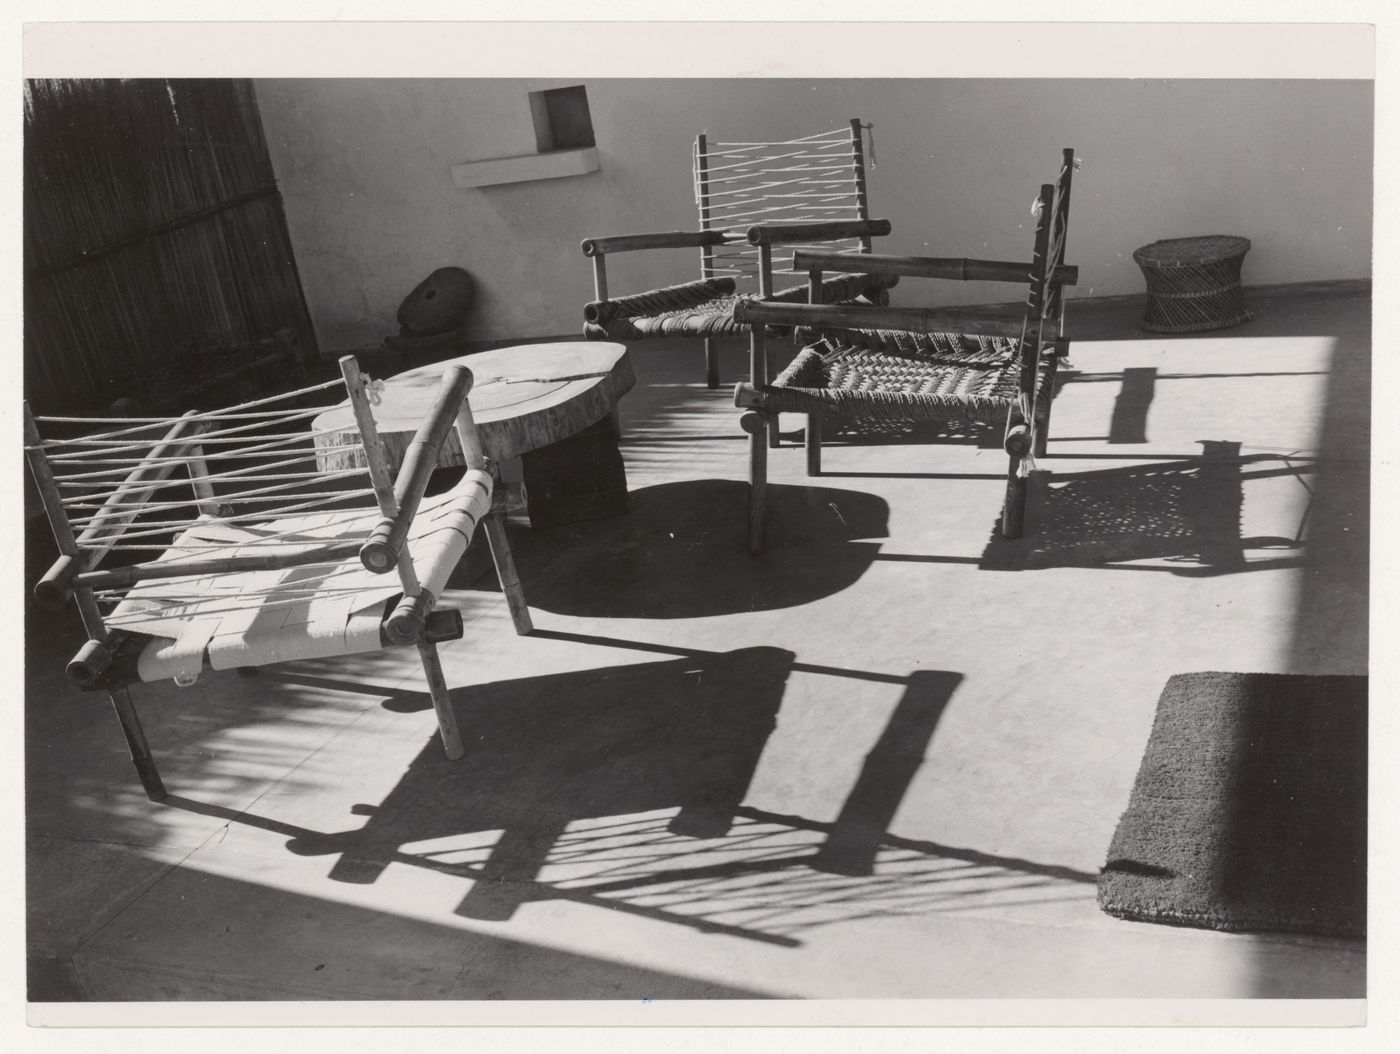 View of bambou armchairs and a wood table designed by Pierre Jeanneret in the loggia of his house, Sector 5, Chandigarh, India